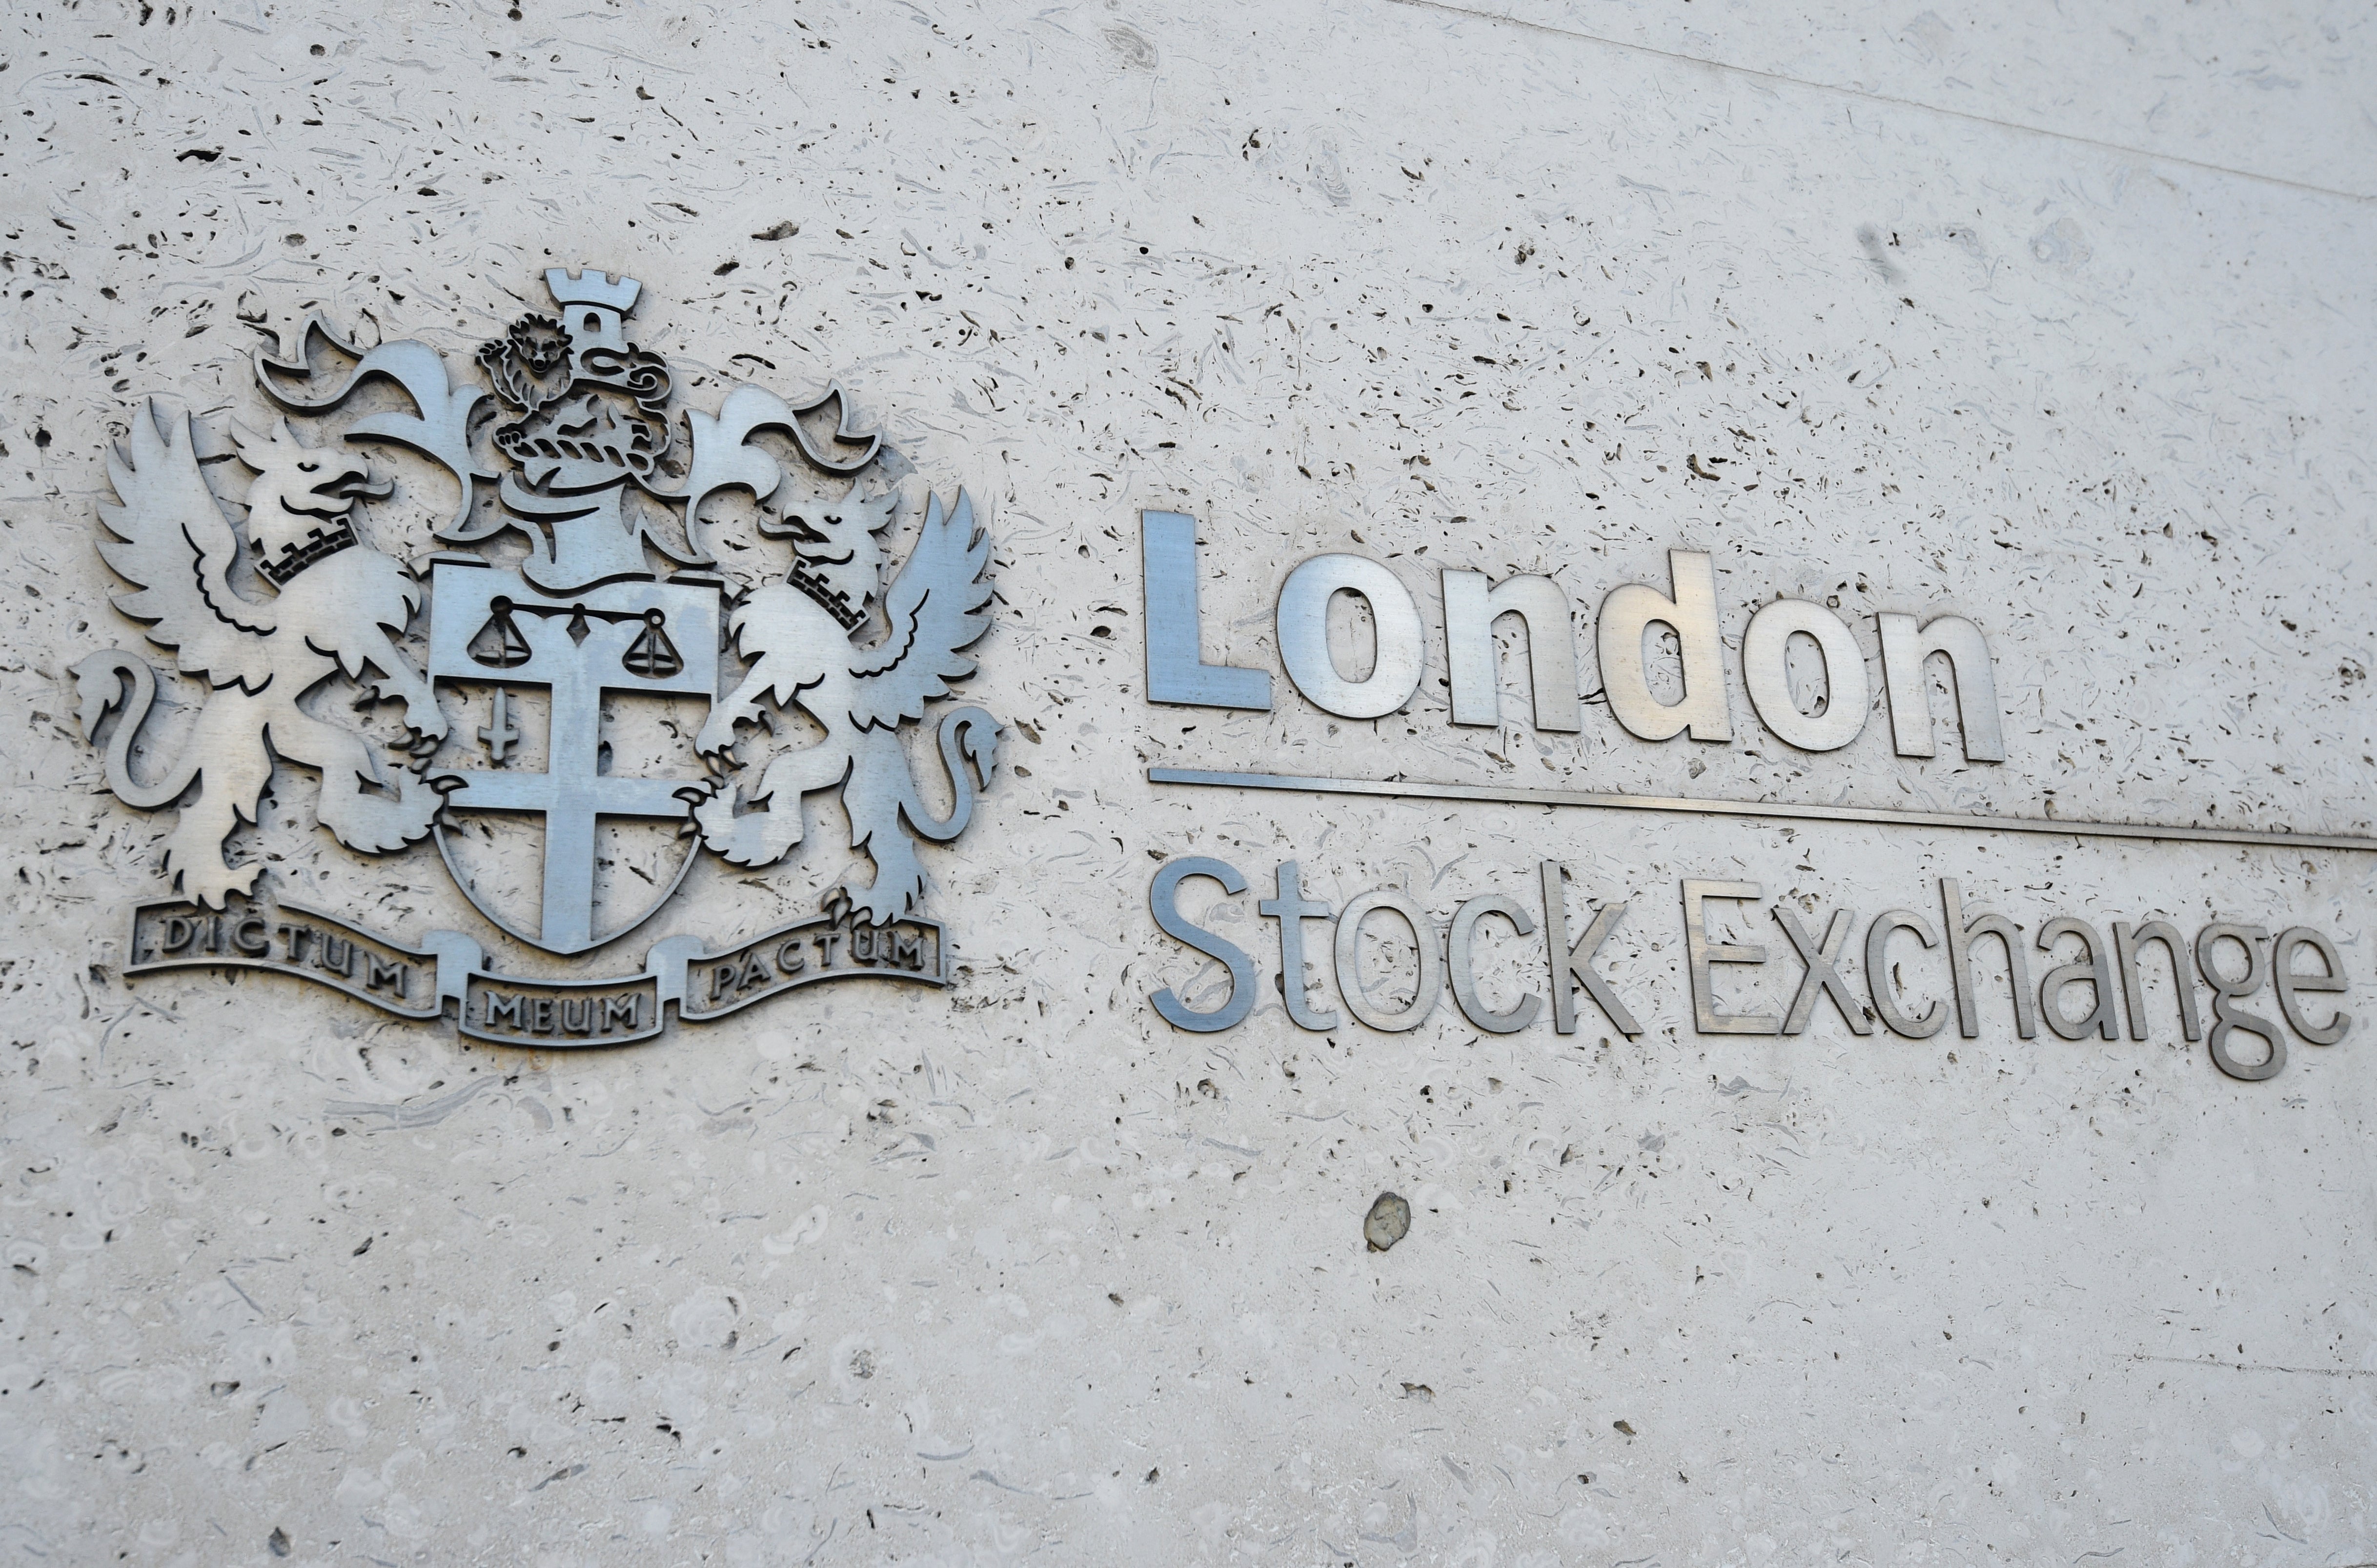 London Stock Exchange Halts Trading in More Russian Stocks